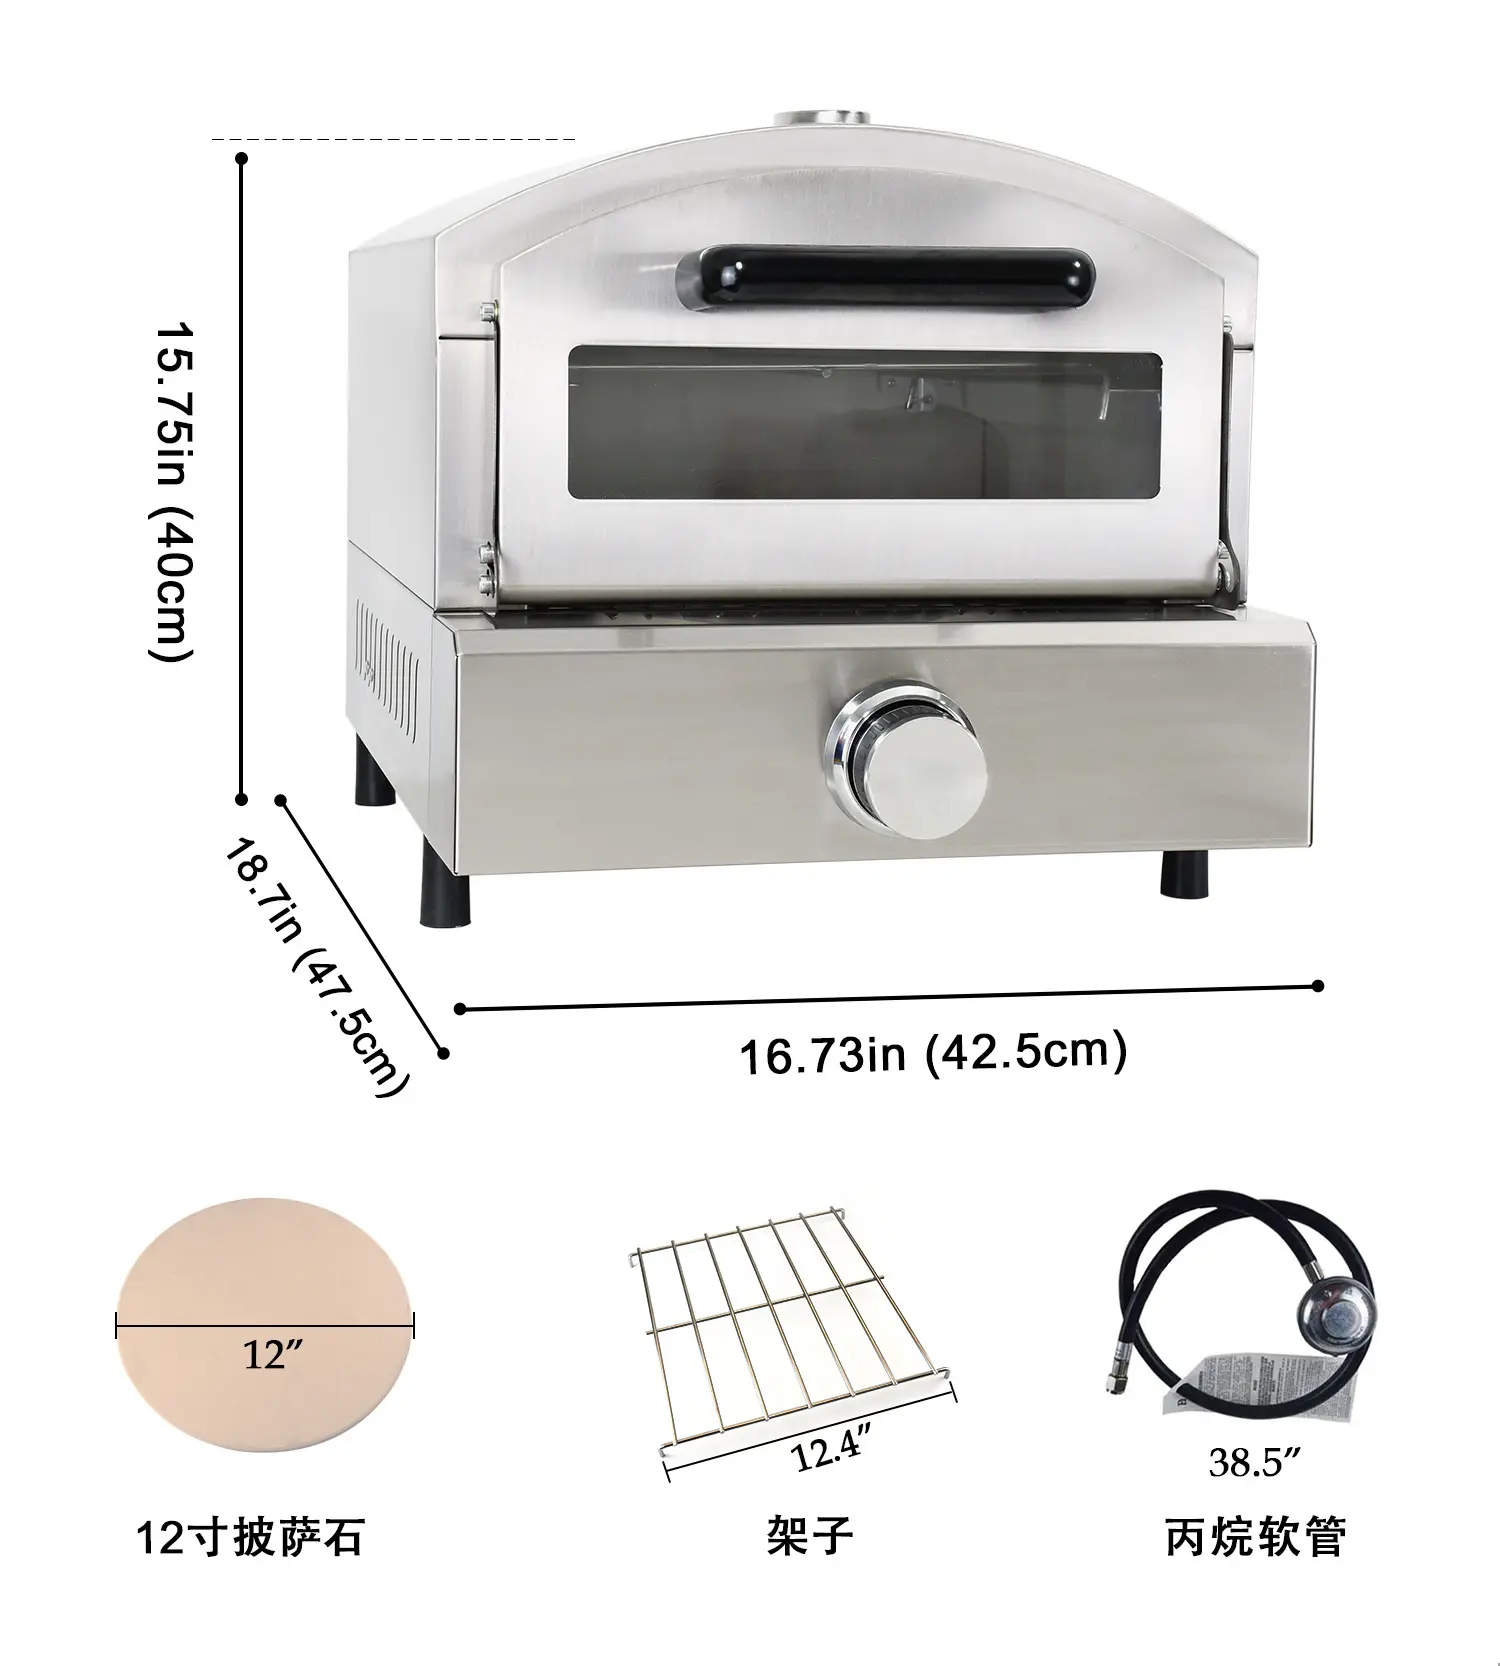 Oven Gas Kitchen Gas Range Stainless Steel Free Standing Oven Bread Pizza Baking Stove Cooking Appliances